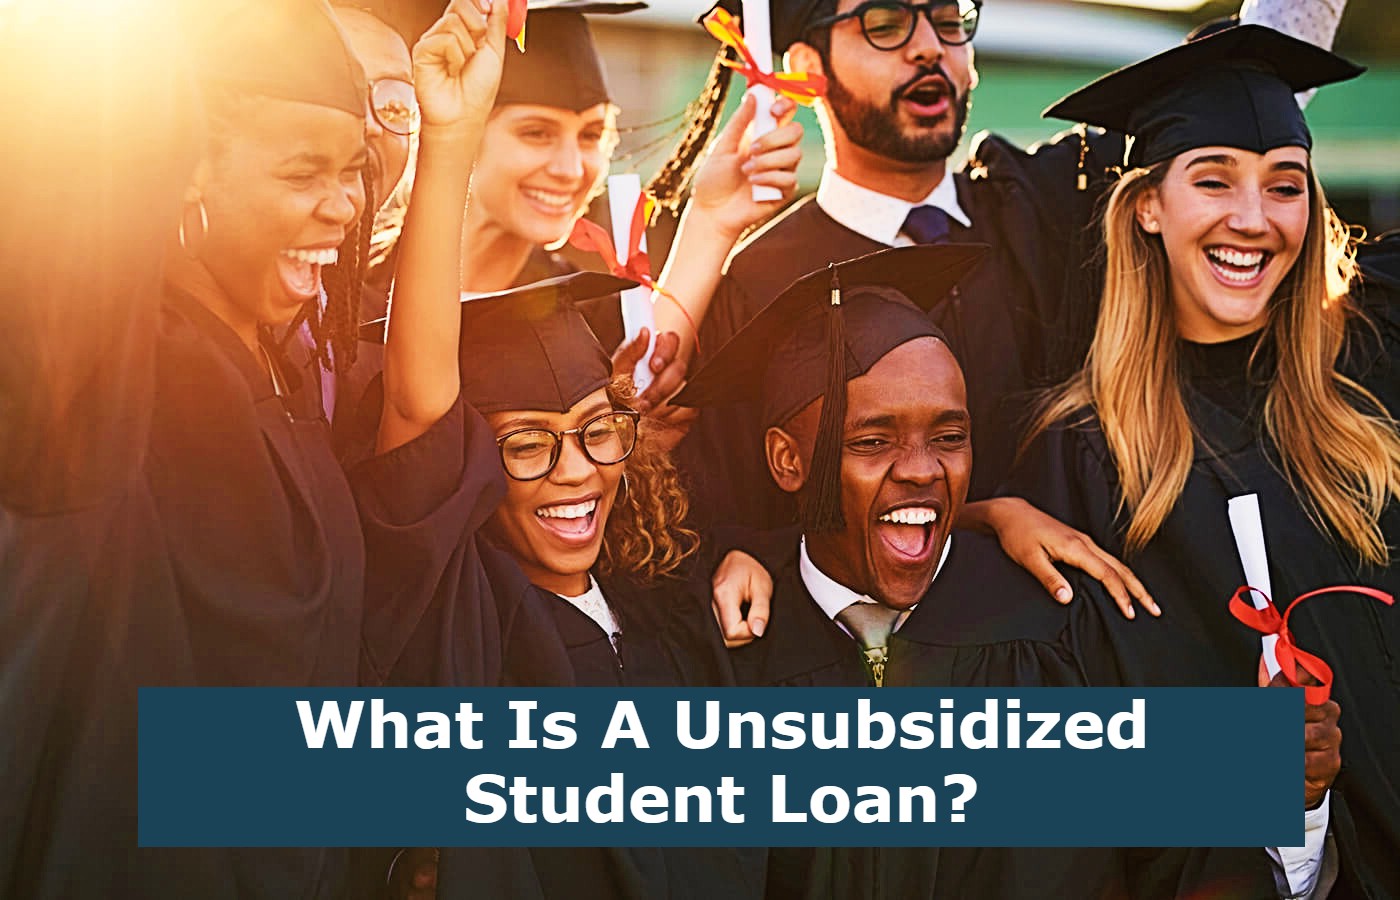 What Is A Unsubsidized Student Loan?